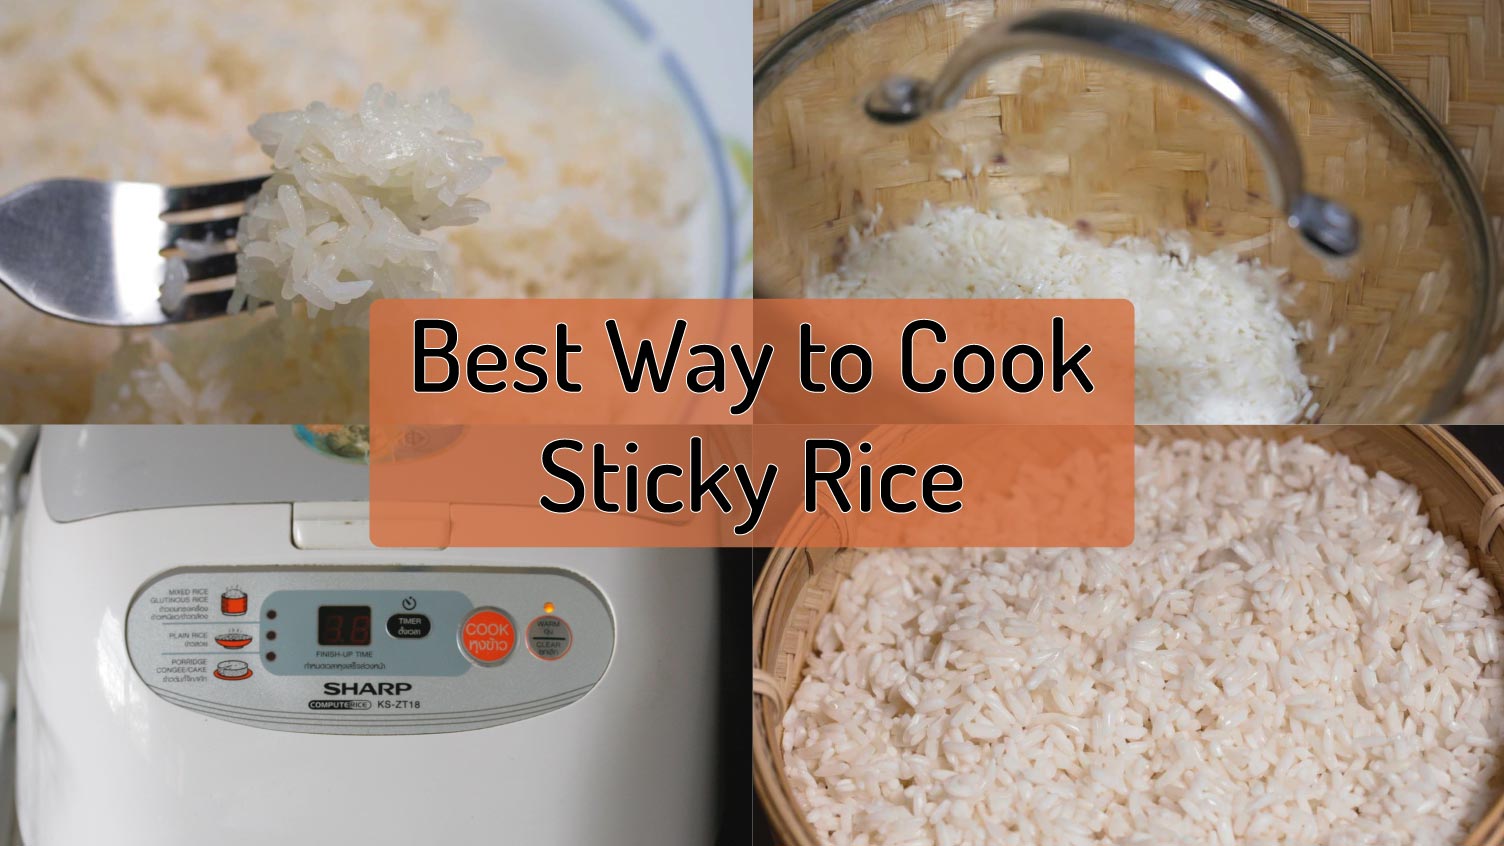 How to Make Thai Sticky Rice (So It's Fluffy and Moist)